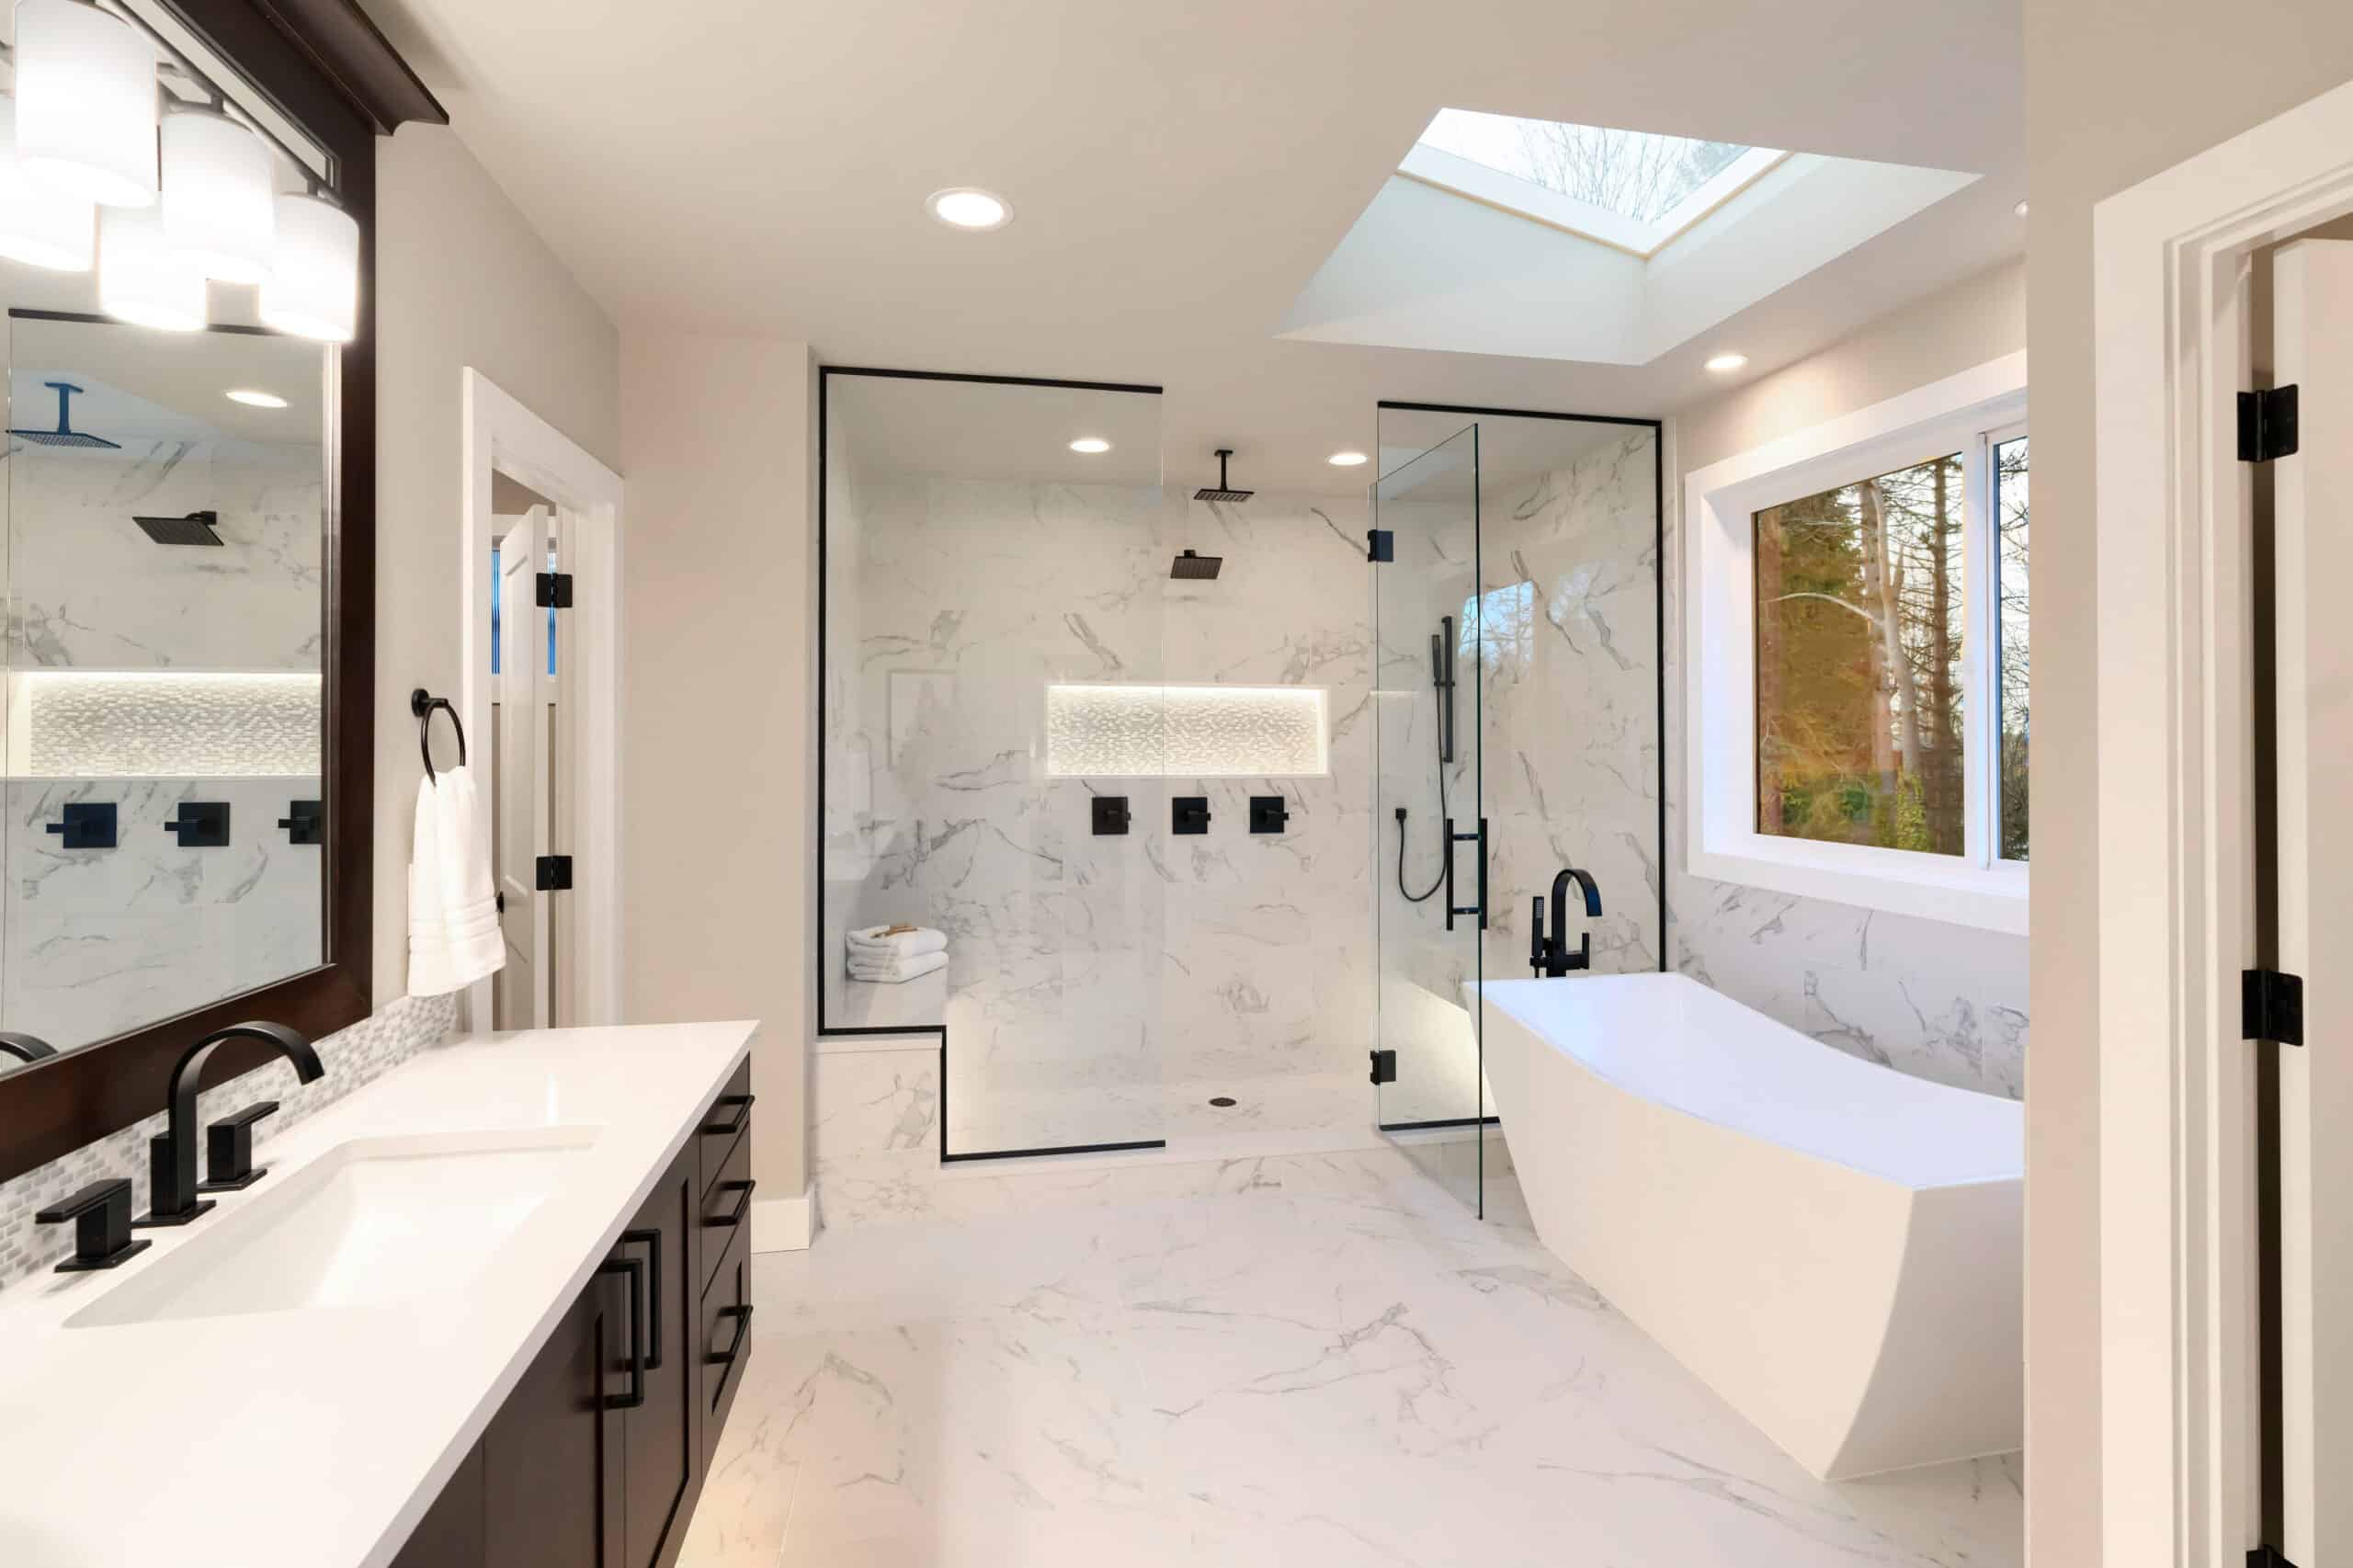 Luxury contemporary home bathroom interior with dark brown cabinets, white marble, walk in shower, free standing tub, two mirrors, flowers.